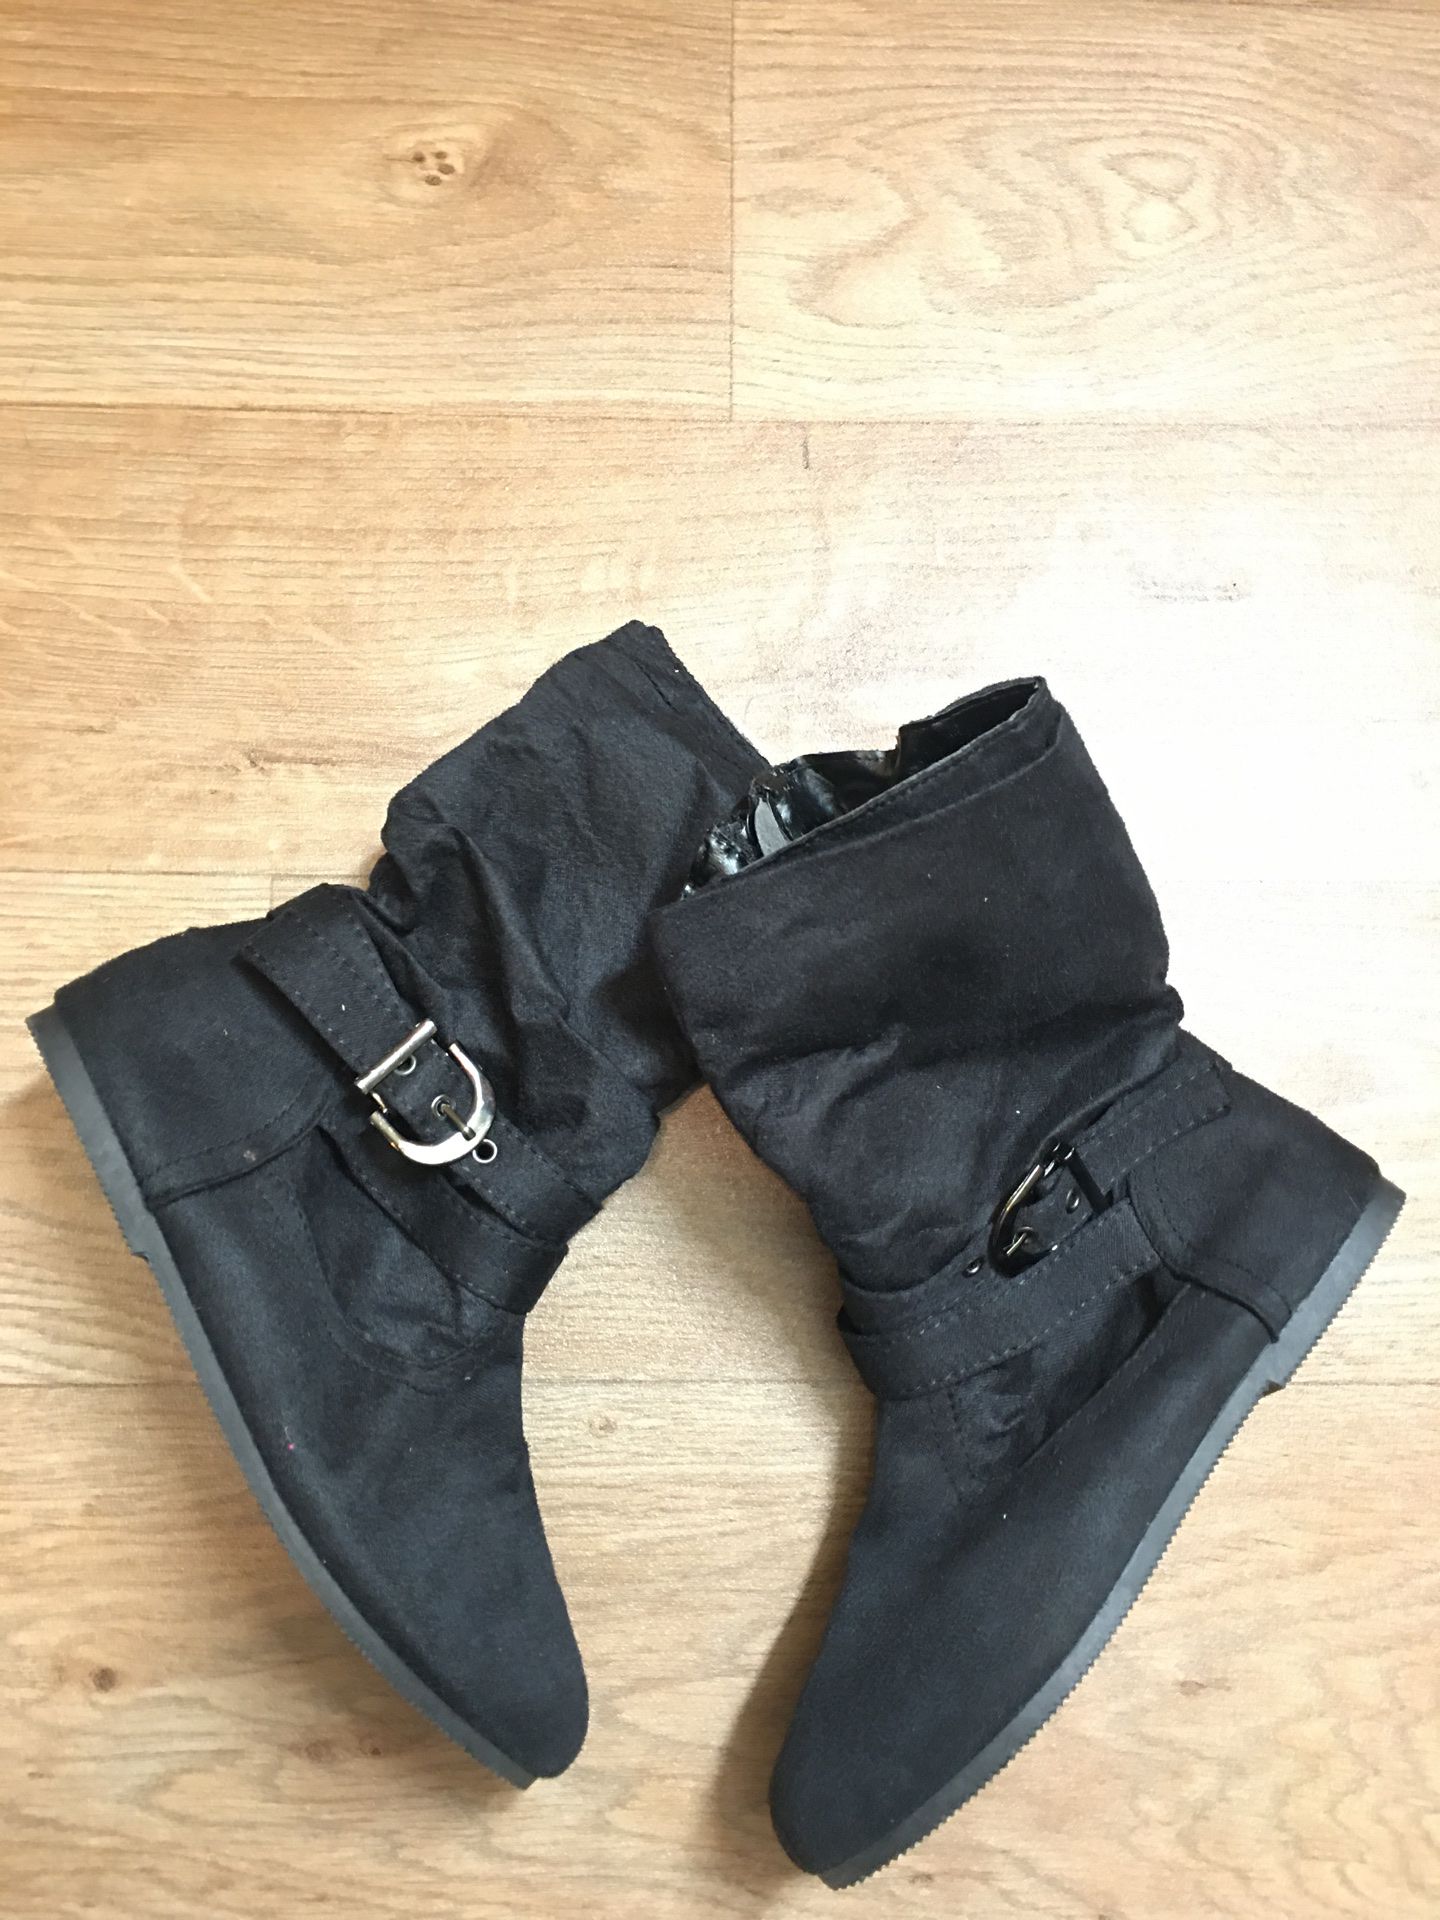 Girls boots Size 3 New No Tags